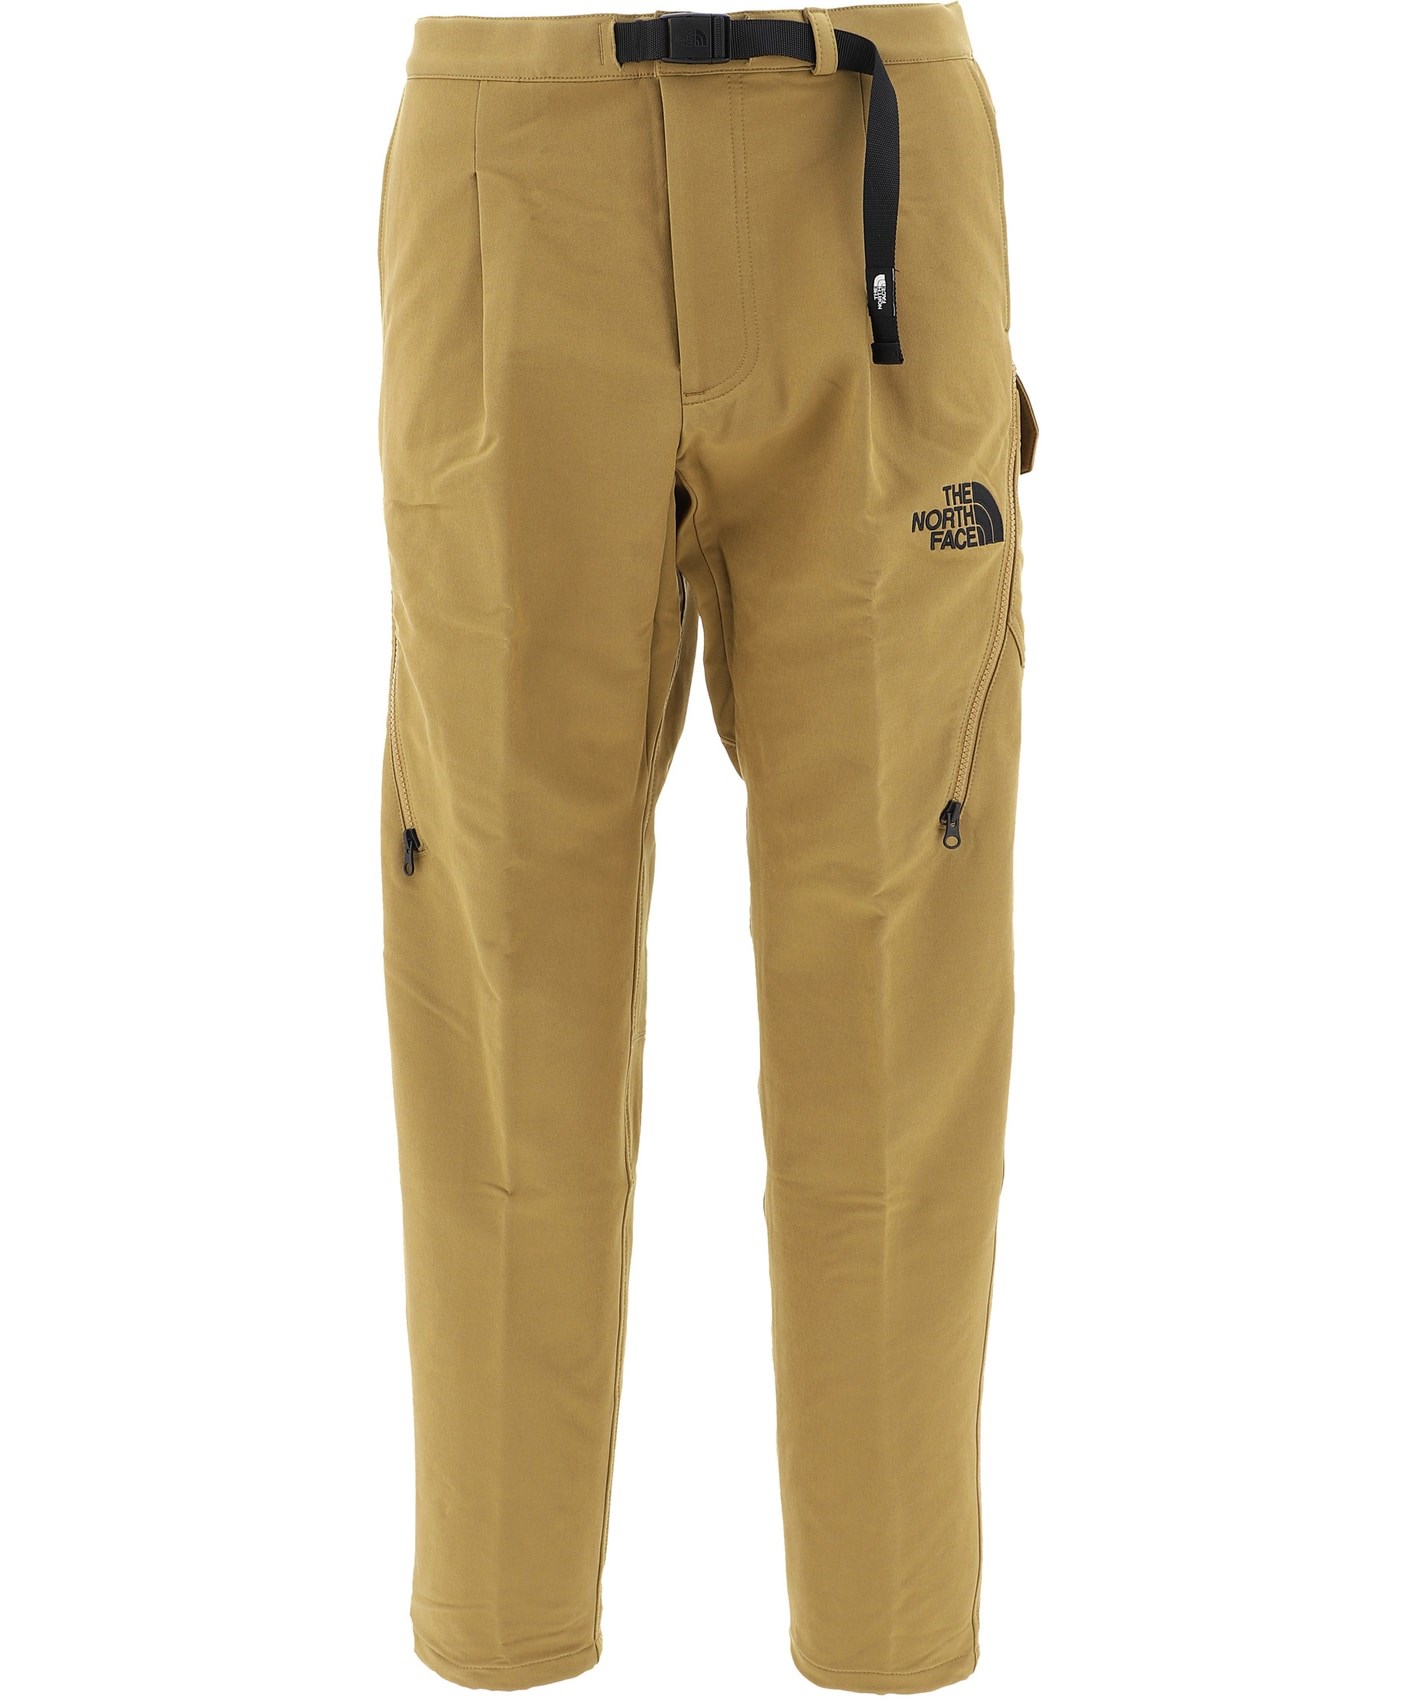 【The North Face Black Series】"City" cargo pants